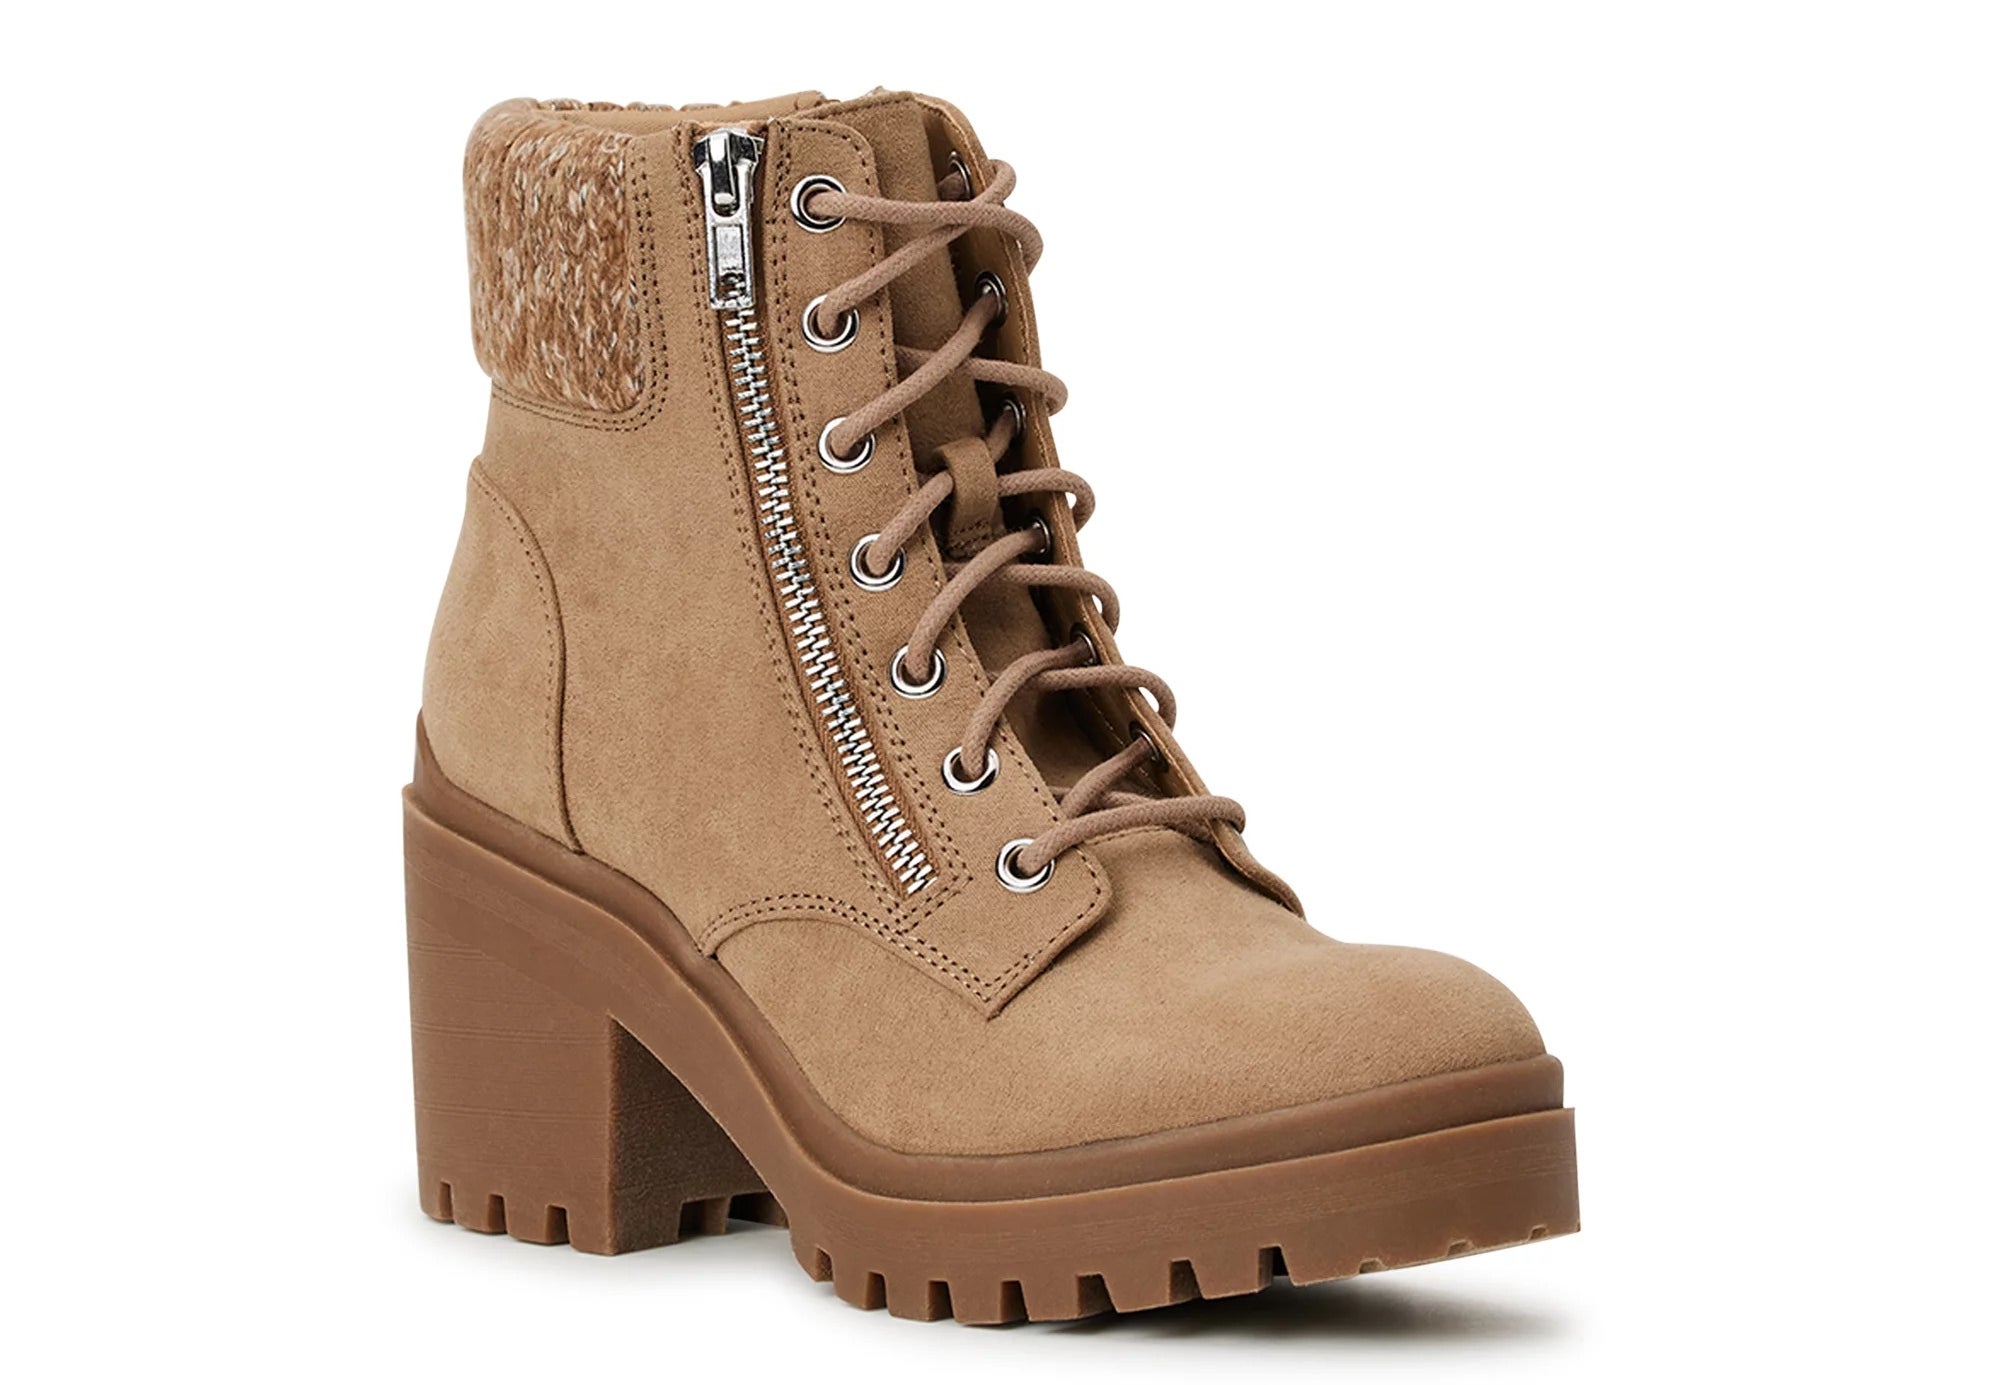 The taupe lace-up boot with a zipper accent and a sweater knit collar, set on a block heel and a thick lug sole